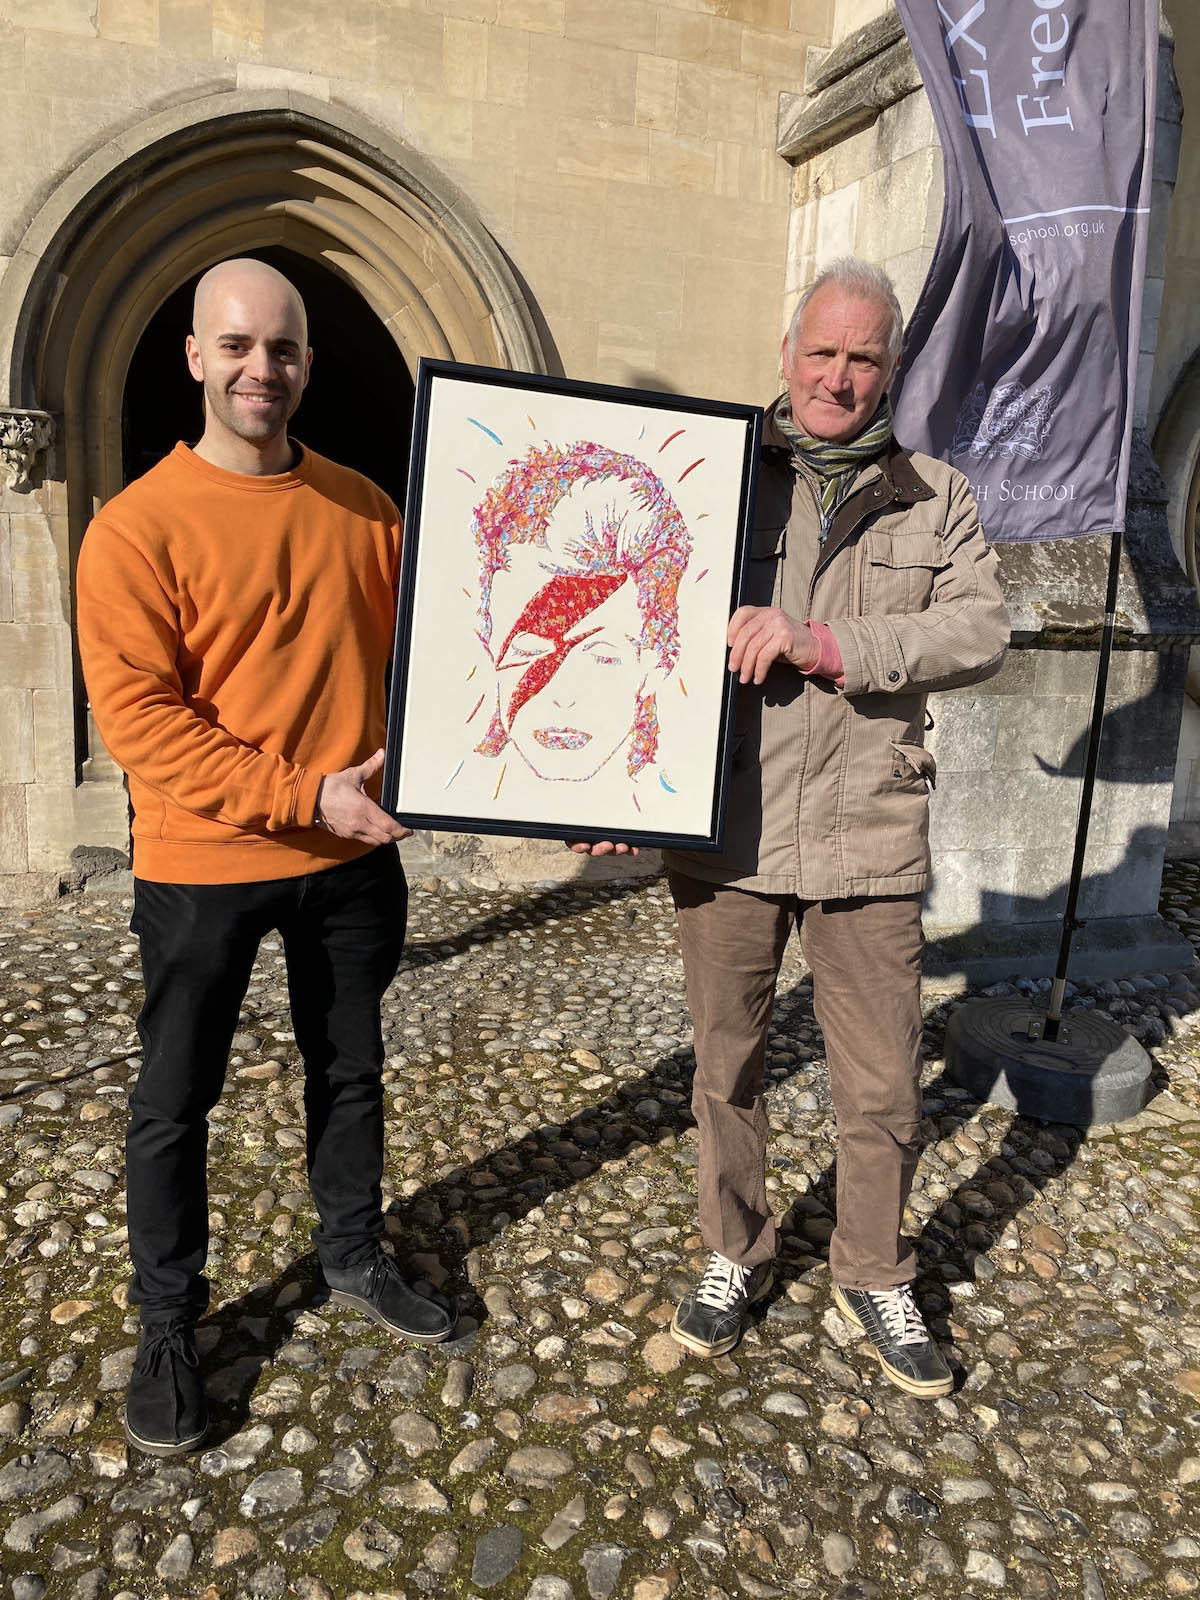 Kerwin Blackburn exhibiting his Jackson Pollock-inspired pop art music paintings at the Crypt Gallery at Norwich School in Norfolk, February-March 2022 | By Kerwin | David Bowie prints